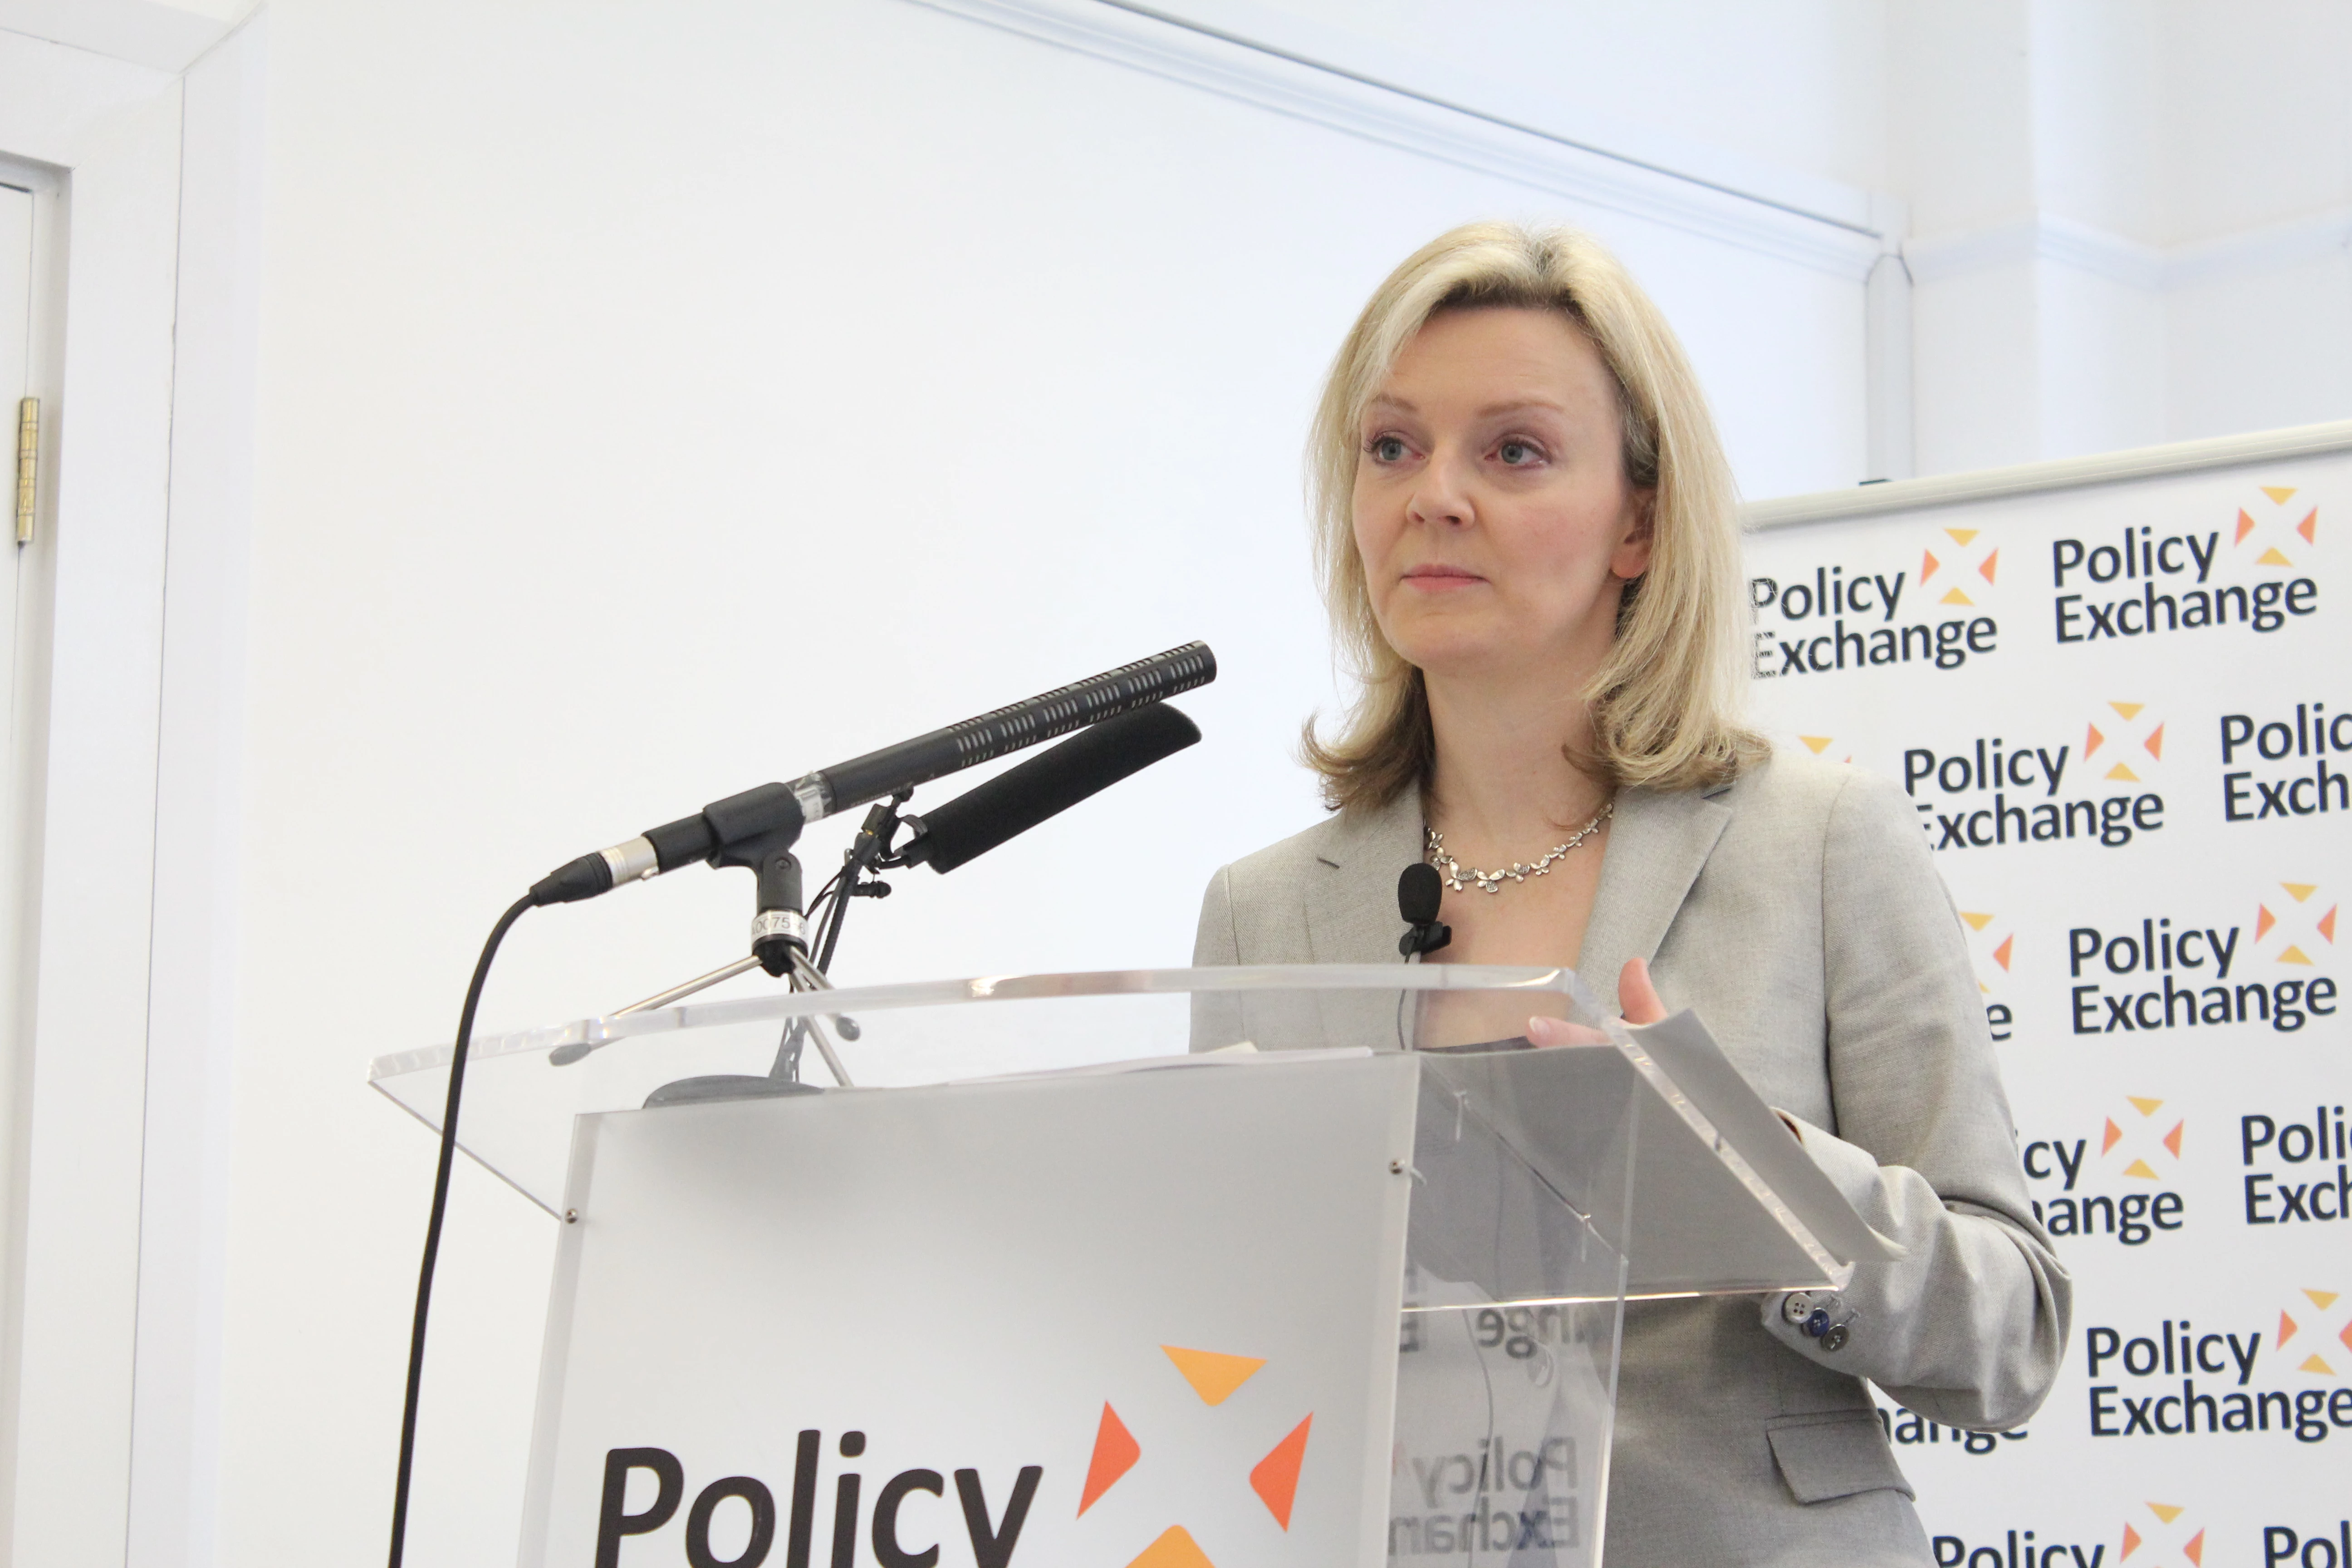 Liz Truss MP, Minister for Education and Childcare, at her speech setting out government plans to promote more great childcare